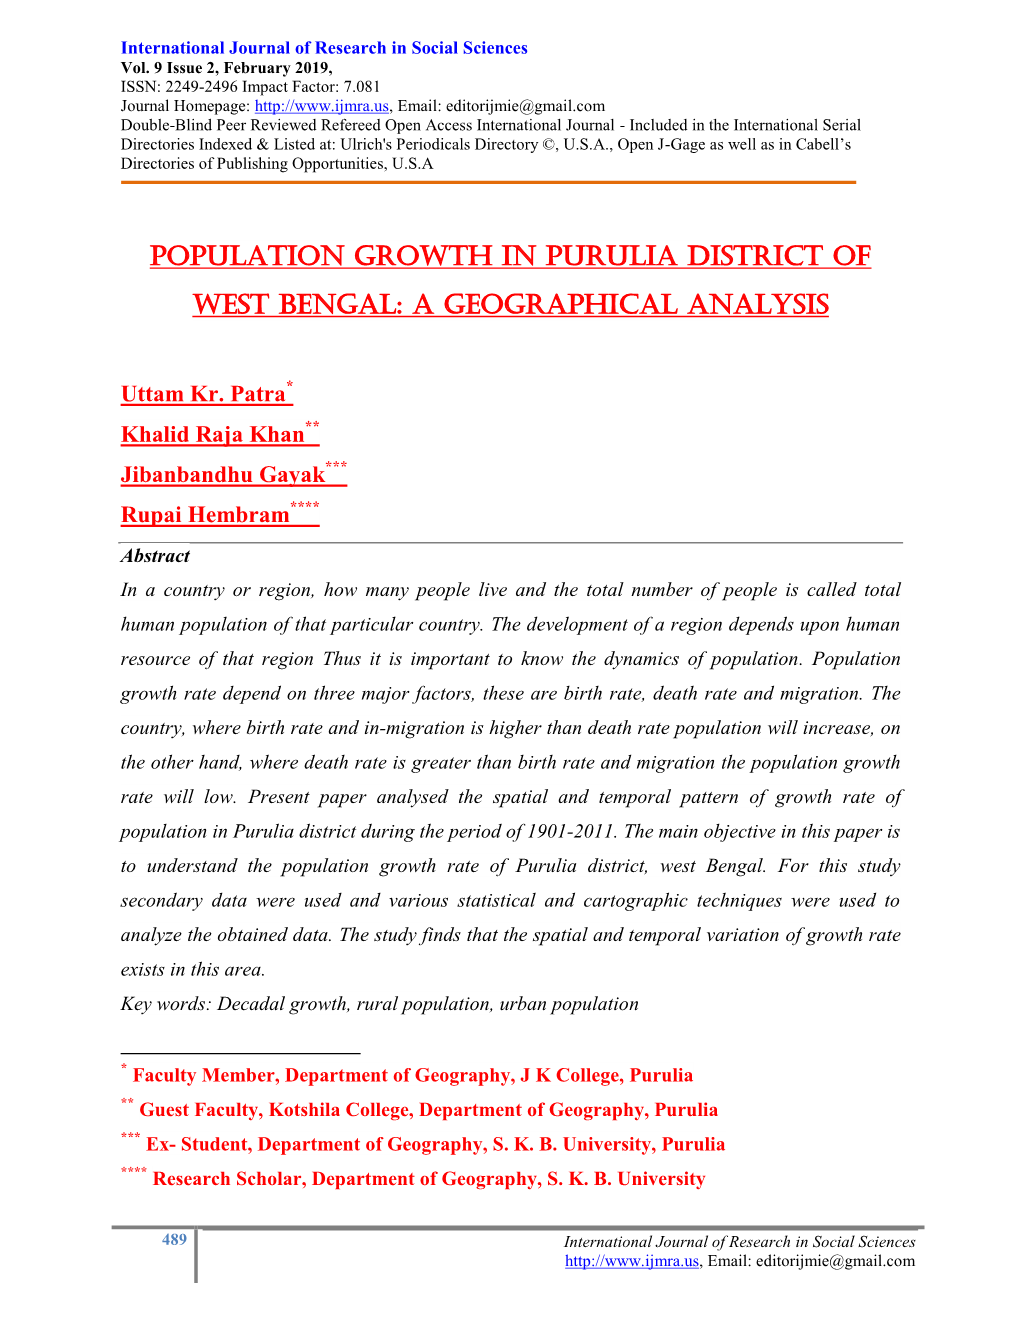 Population Growth in Purulia District of West Bengal: a Geographical Analysis